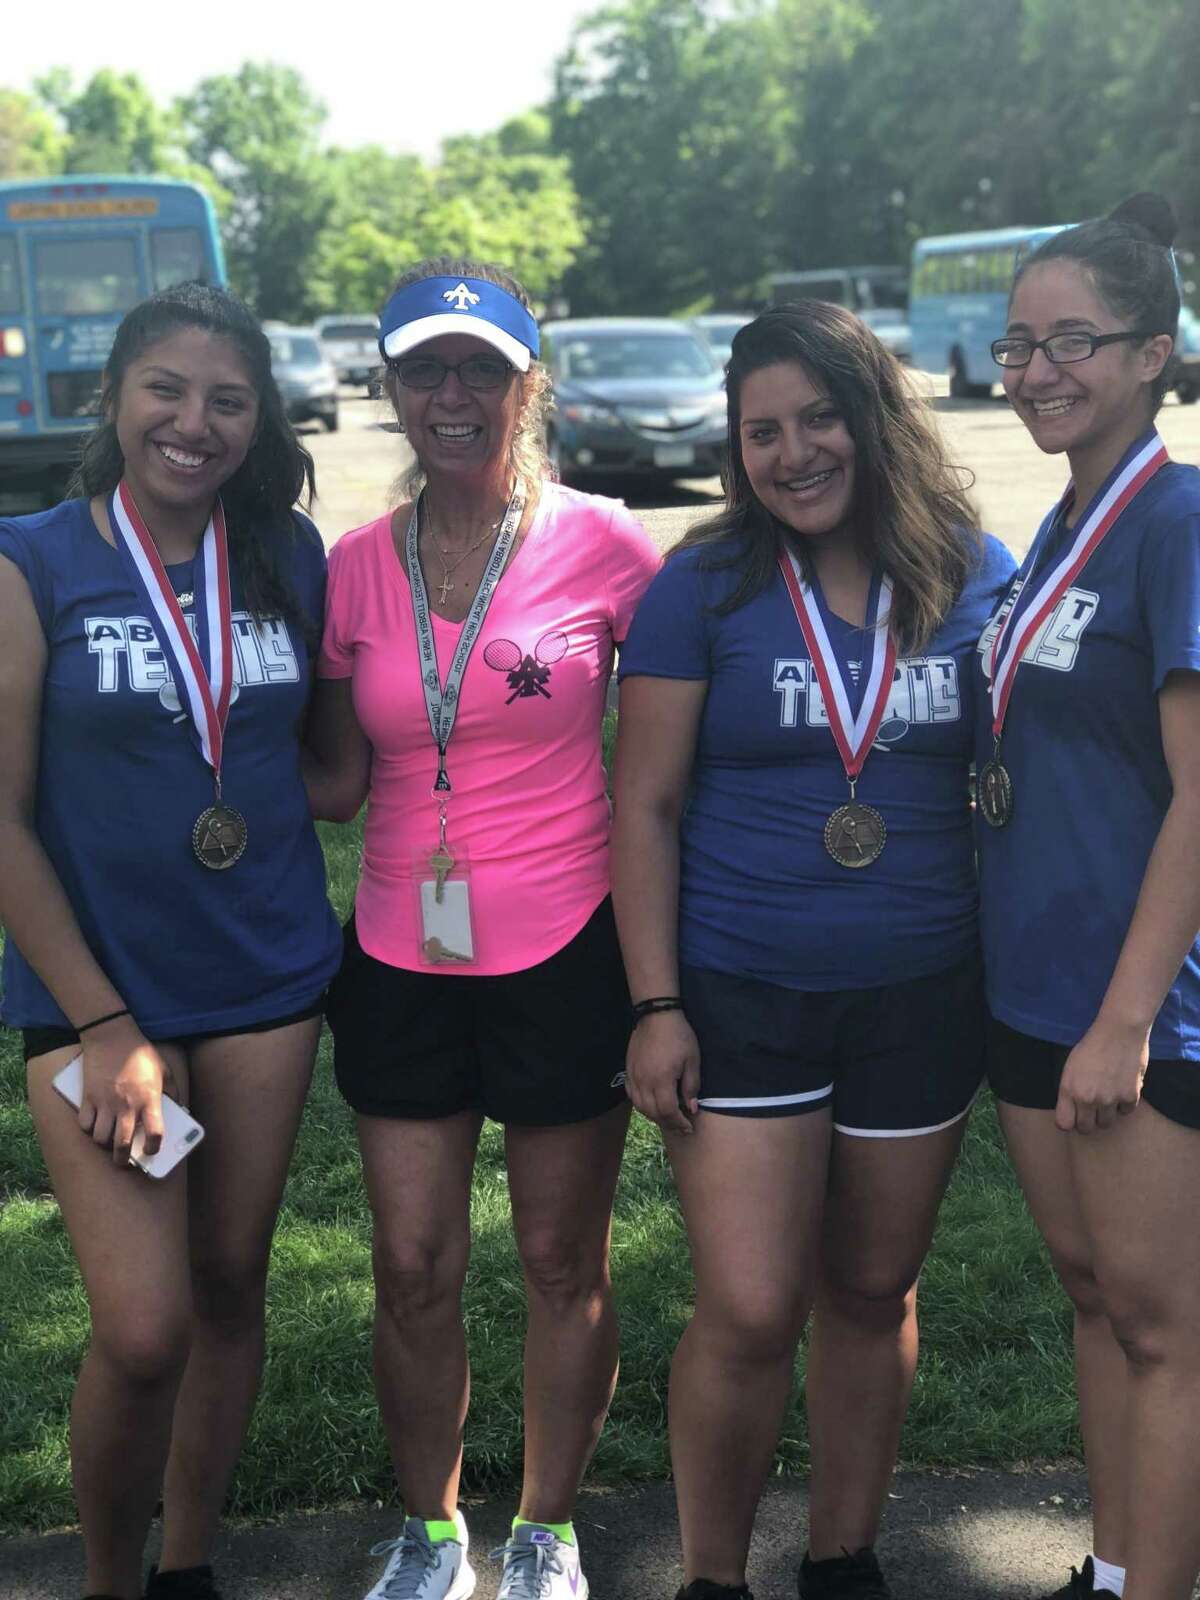 Abbott Tech tennis players Ebelin Lalvay (left), Karen Pelaez (second from right) and Jesslyn Rodriguez (right), along with coach Shelley Visinski at the CTC championships, held at Wesleyan University in Middletown May 23, 2018.